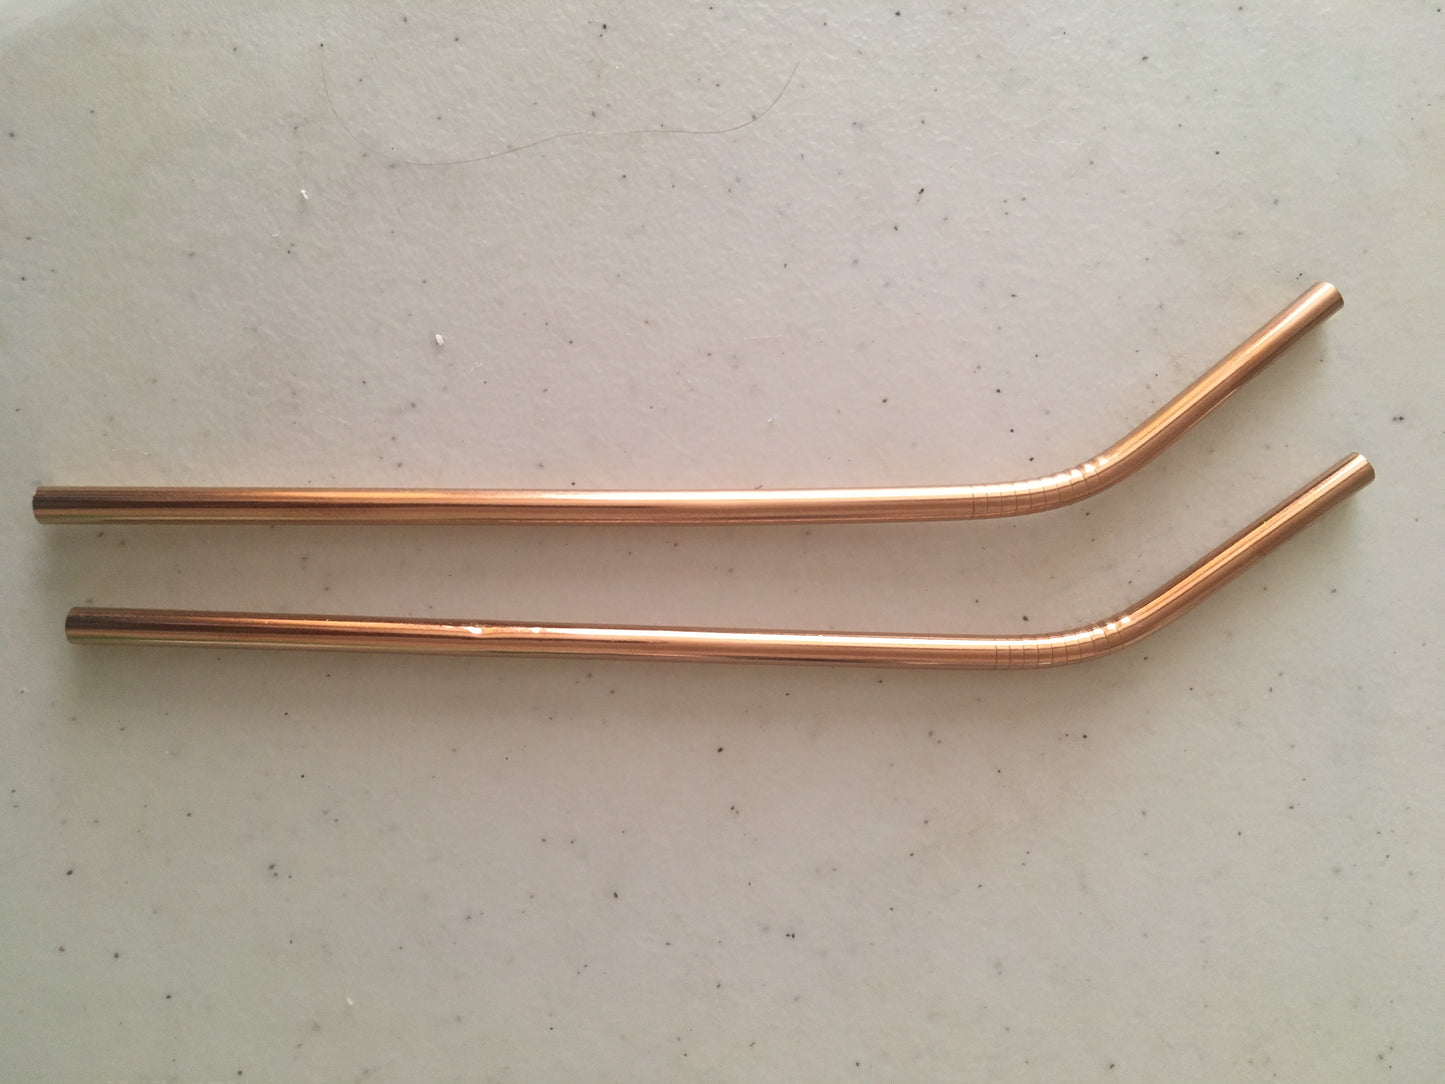 Reusable metal drinking straw - single bent straw, available in various colours